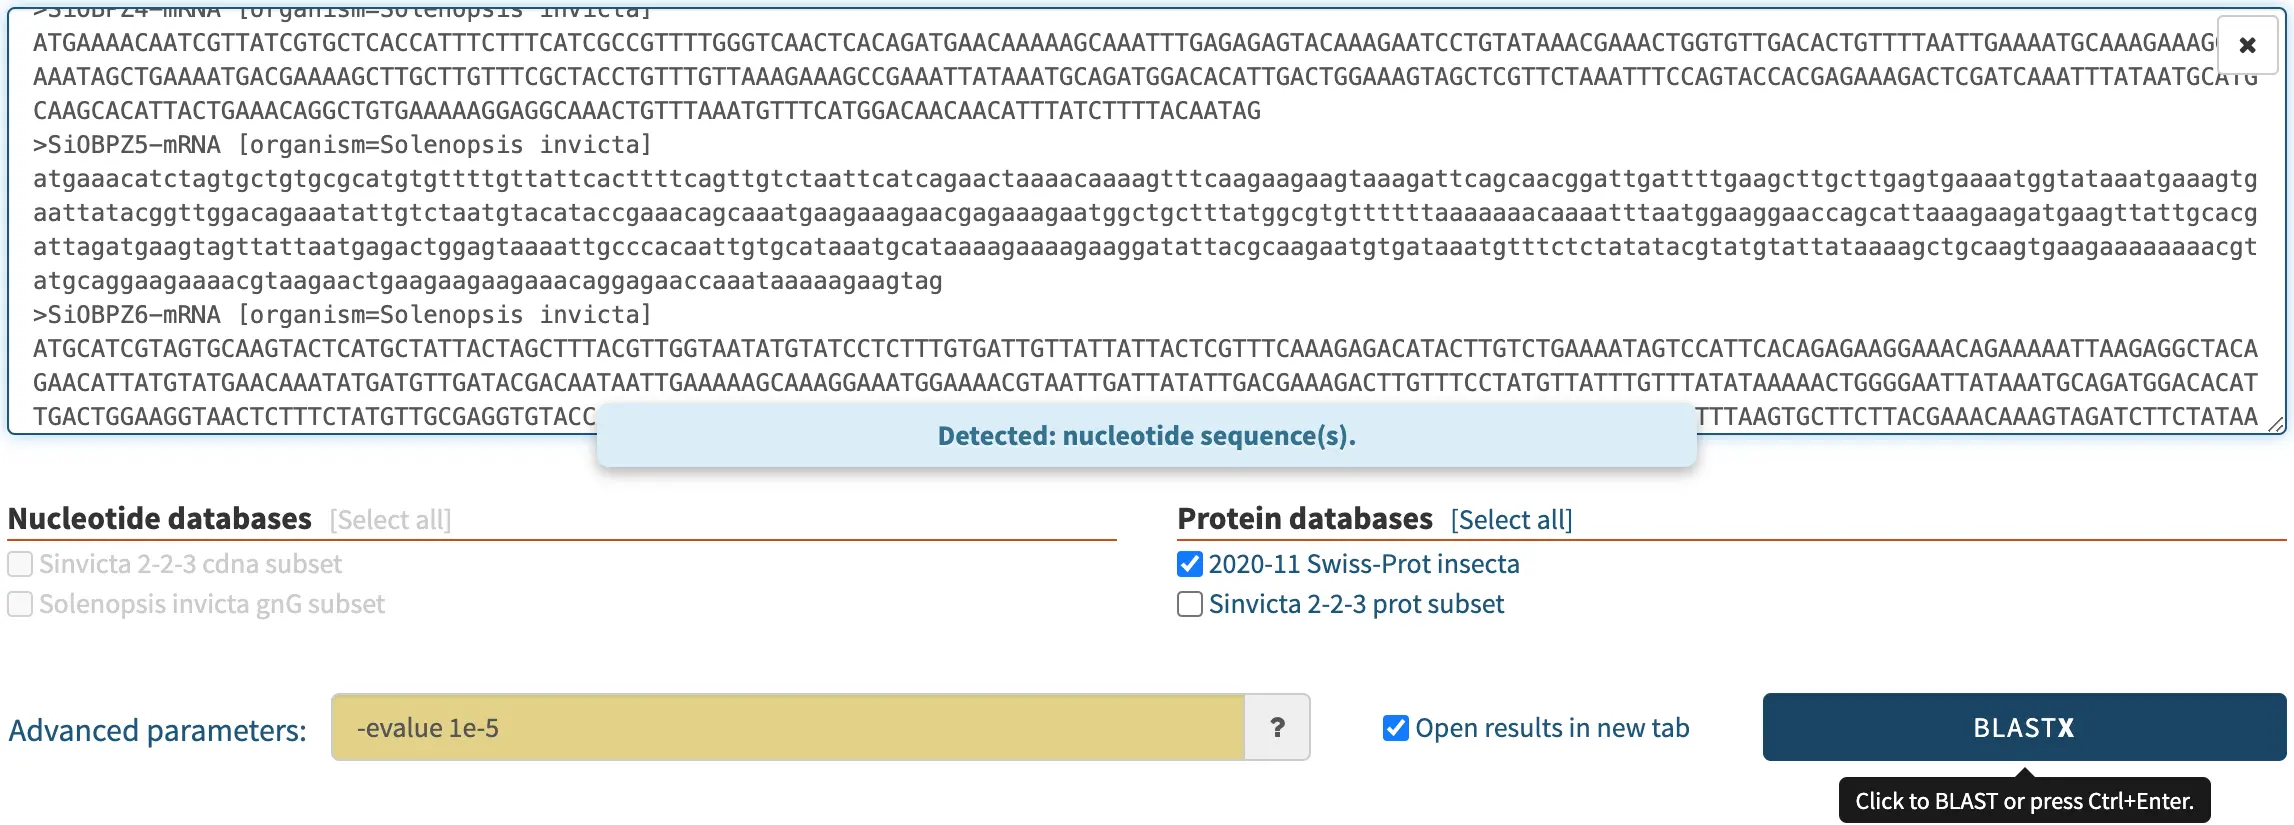 SequenceServer automatically selected BLASTX after detecting that the user entered a nucleotide query to search a protein database